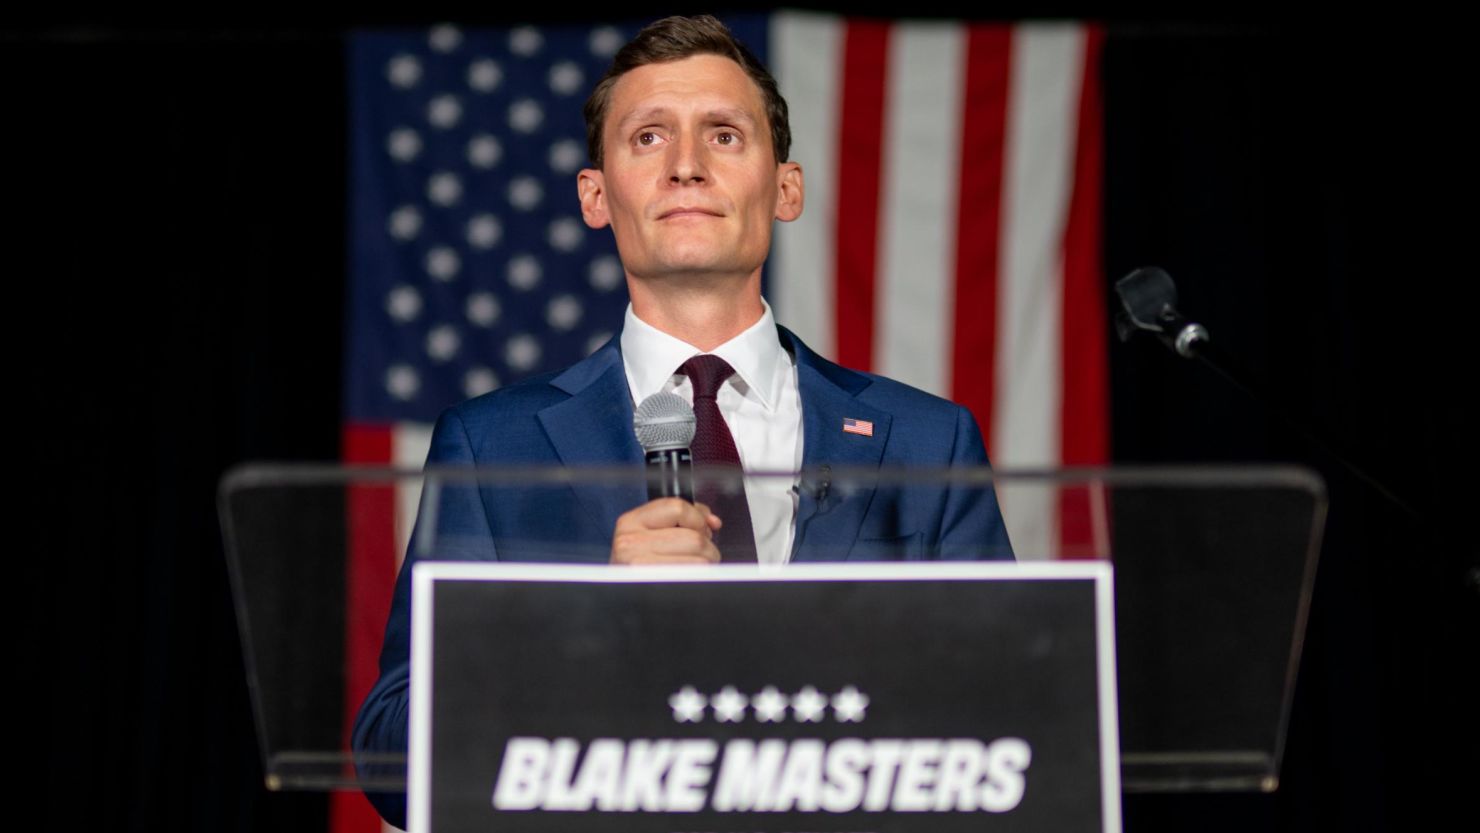 Arizona Senate candidate Blake Masters speaks at his election night watch party in Chandler on August 2, 2022.